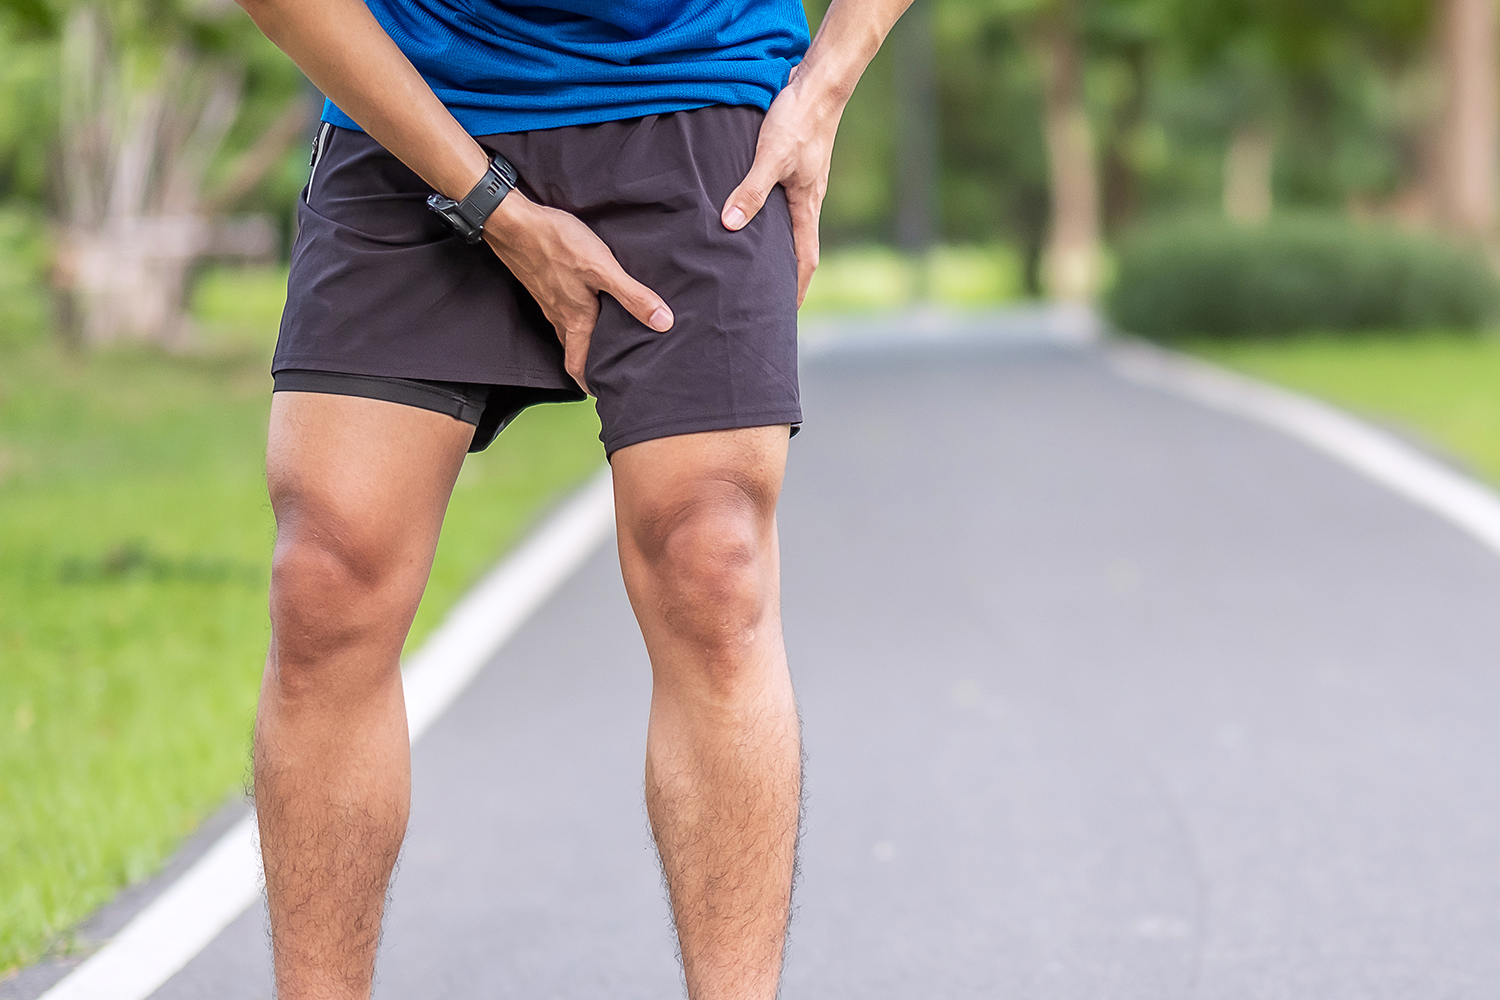 4 Ways to Prevent Chafing While Being Active - No More Chafe - Thigh Guards